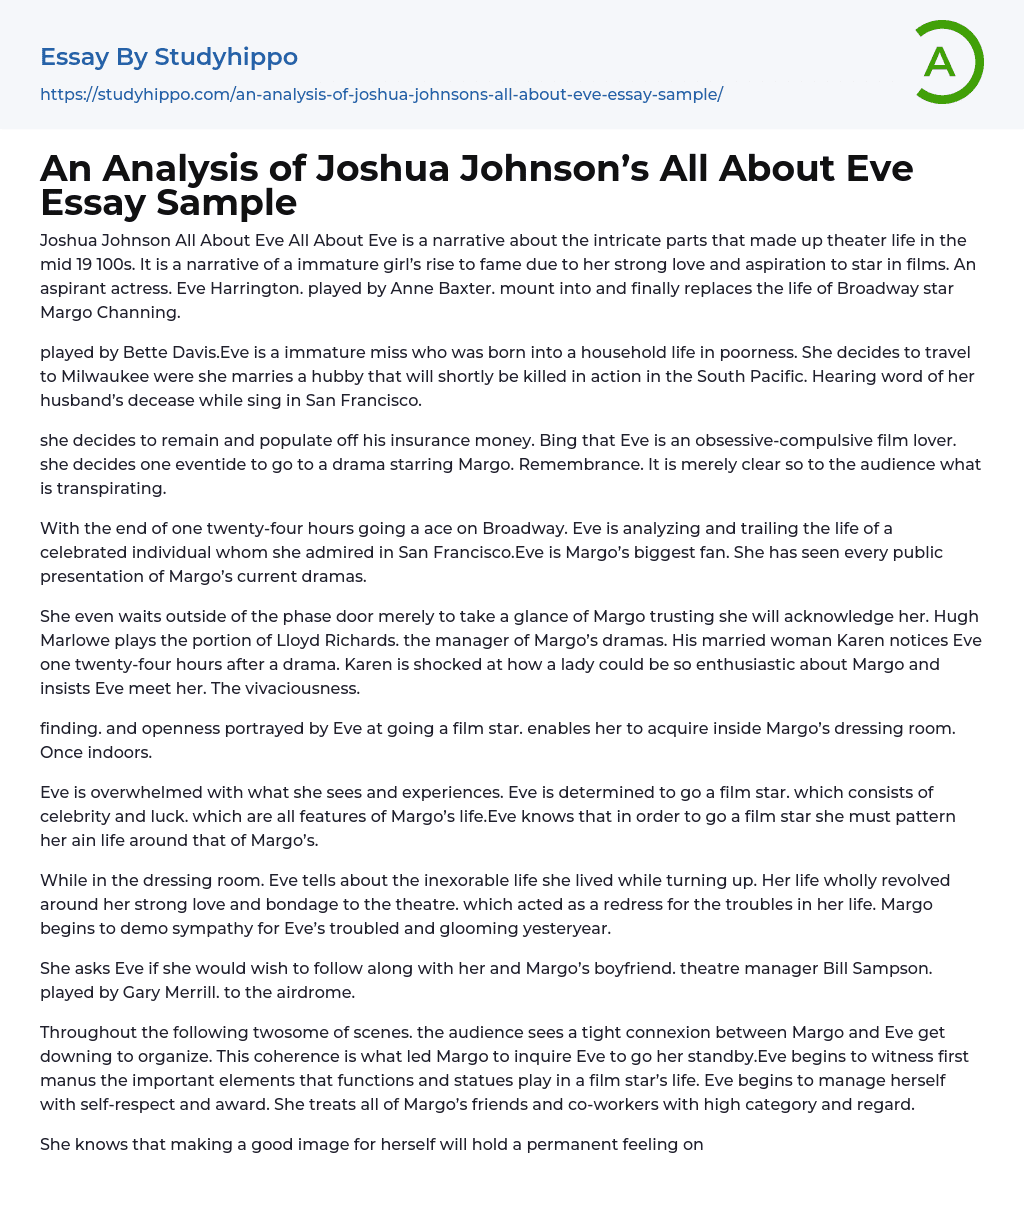 An Analysis of Joshua Johnson’s All About Eve Essay Sample